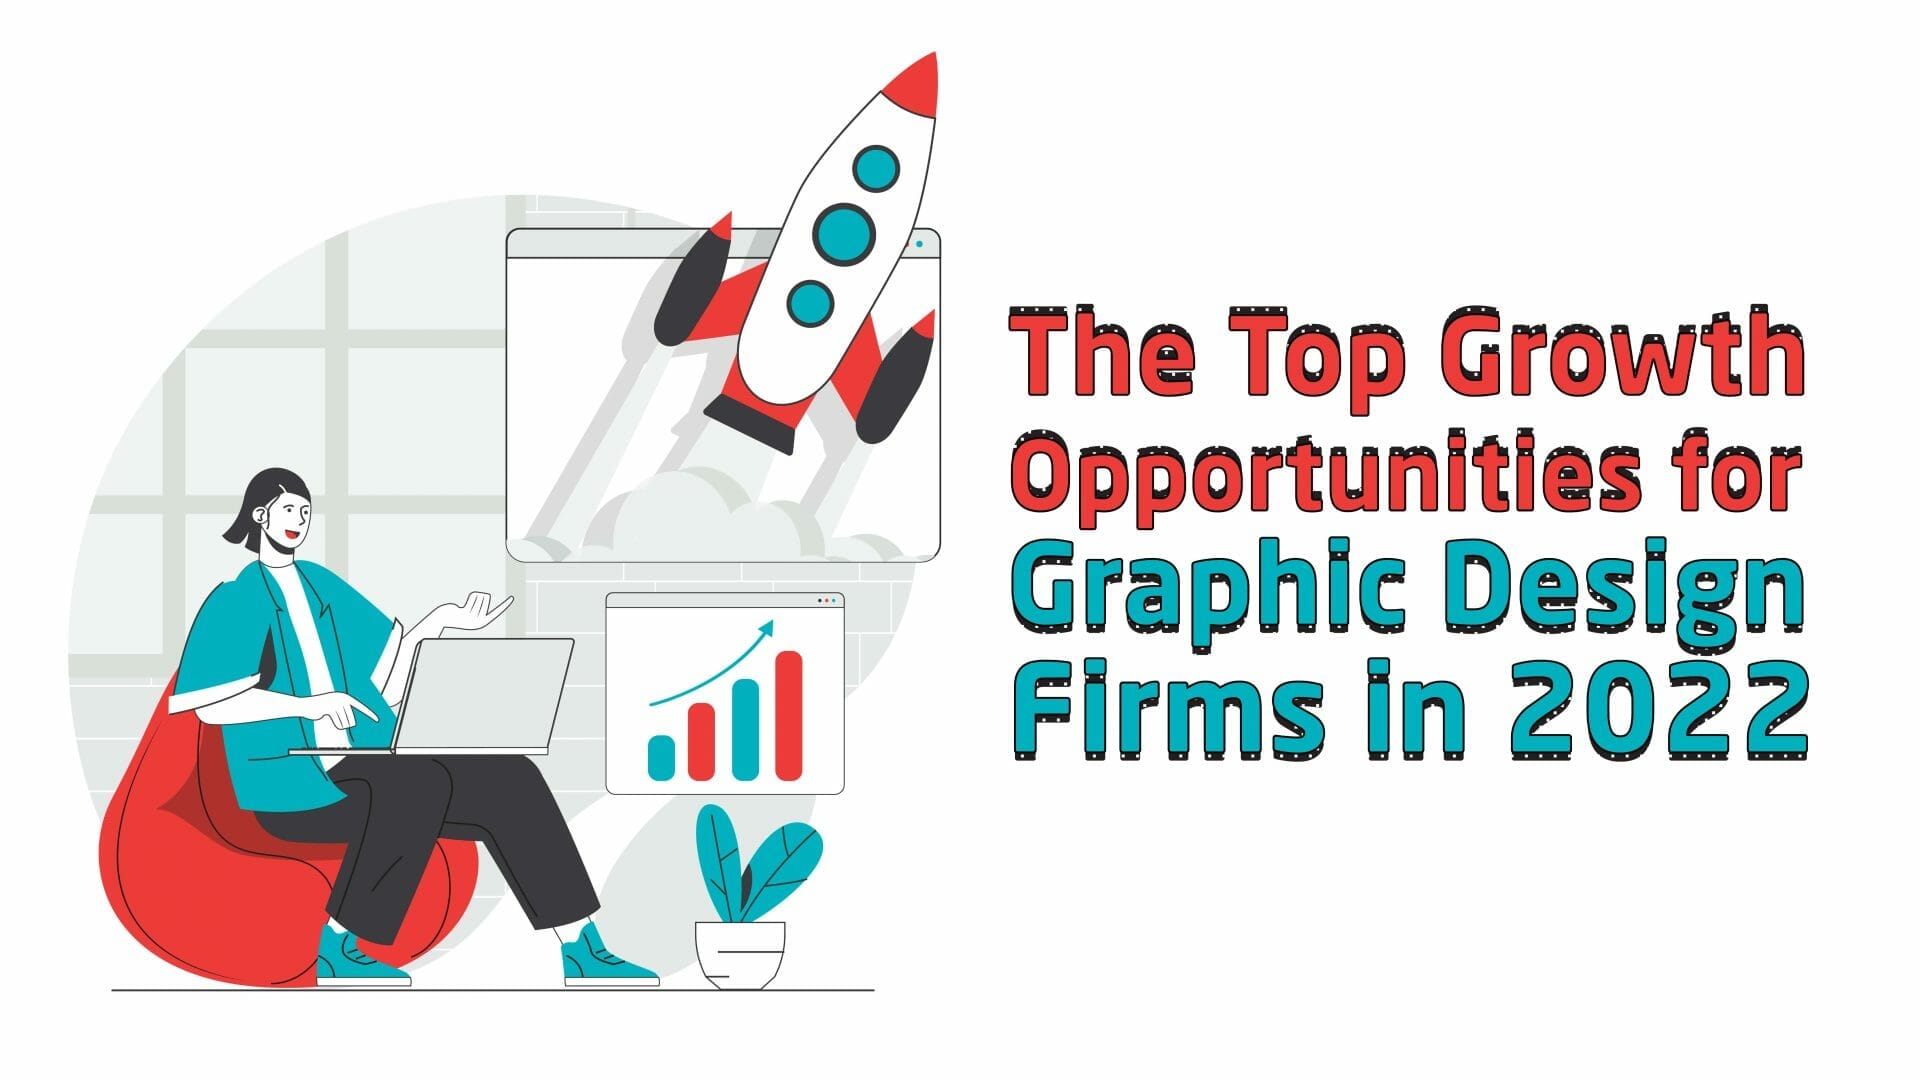 The Top Growth Opportunities for Graphic Design Firms in 2022